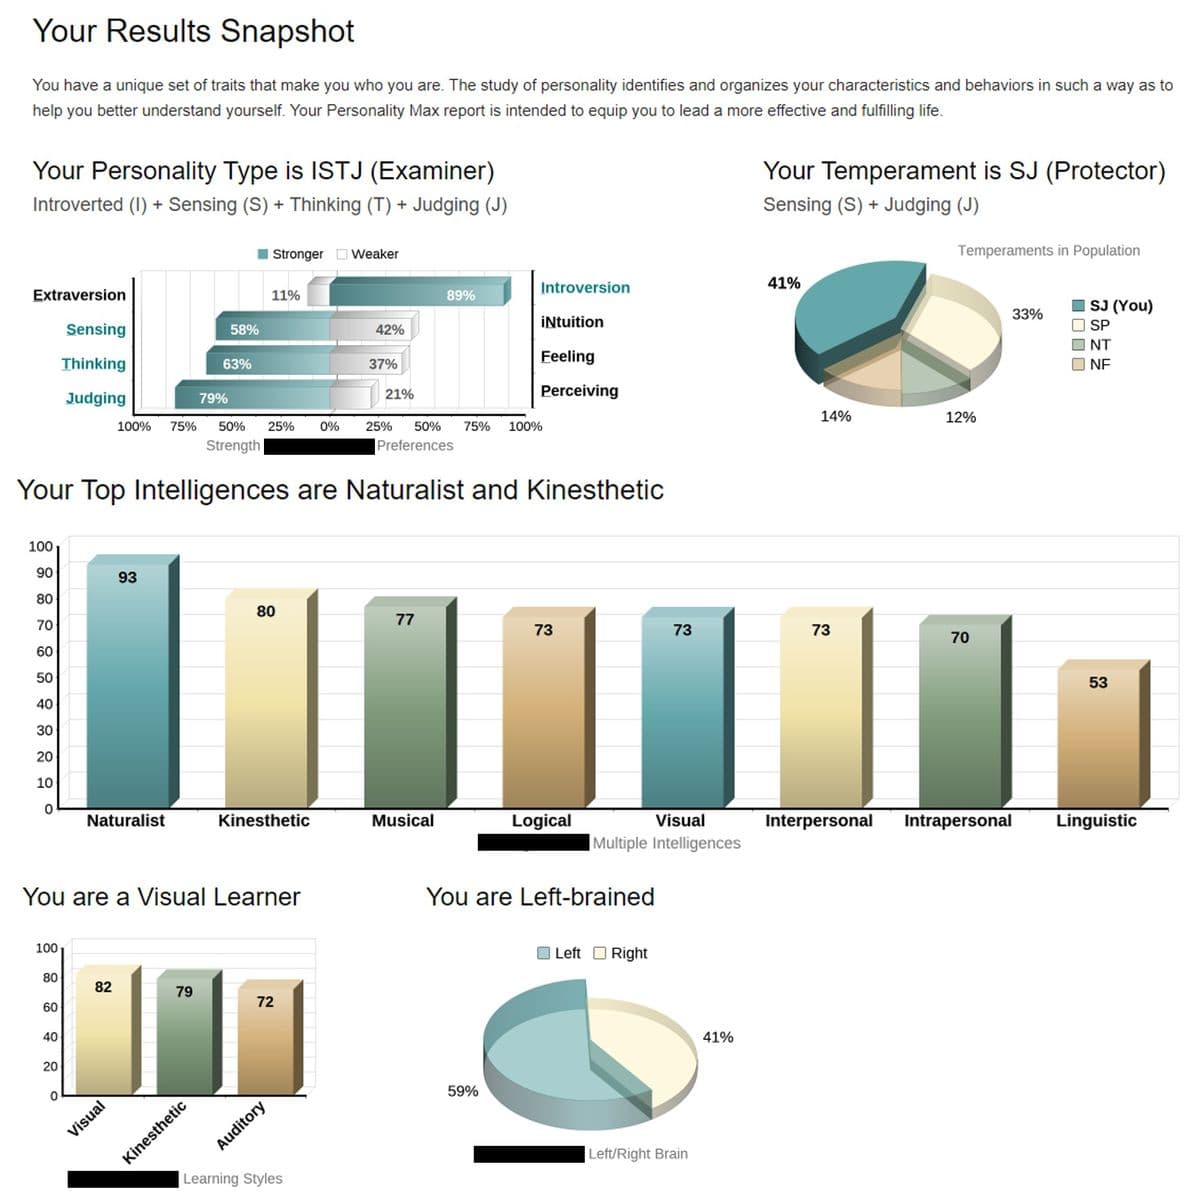 Your Results Snapshot
You have a unique set of traits that make you who you are. The study of personality identifies and organizes your characteristics and behaviors in such a way as to
help you better understand yourself. Your Personality Max report is intended to equip you to lead a more effective and fulfilling life.
Your Personality Type is ISTJ (Examiner)
Introverted (1) + Sensing (S) + Thinking (T) + Judging (J)
Extraversion
100
90
80
70
60
50
40
30
20
10
0
100
80
60
40
Sensing
Thinking
Judging
20
0
100%
Naturalist
82
50% 25% 0% 25% 50% 75% 100%
Strength
Preferences
Your Top Intelligences are Naturalist and Kinesthetic
93
Visual
75%
You are a Visual Learner
79%
79
58%
63%
Kinesthetic
Stronger Weaker
11%
80
Kinesthetic
72
Auditory
42%
Learning Styles
37%
21%
77
89%
Musical
Introversion
iNtuition
Feeling
Perceiving
59%
73
Logical
You are Left-brained
Visual
Multiple Intelligences
73
Left Right
0
Left/Right Brain
41%
Your Temperament is SJ (Protector)
Sensing (S) + Judging (J)
41%
14%
73
Temperaments in Population
12%
70
33%
Interpersonal Intrapersonal
000
SJ (You)
☐SP
NT
NF
53
Linguistic